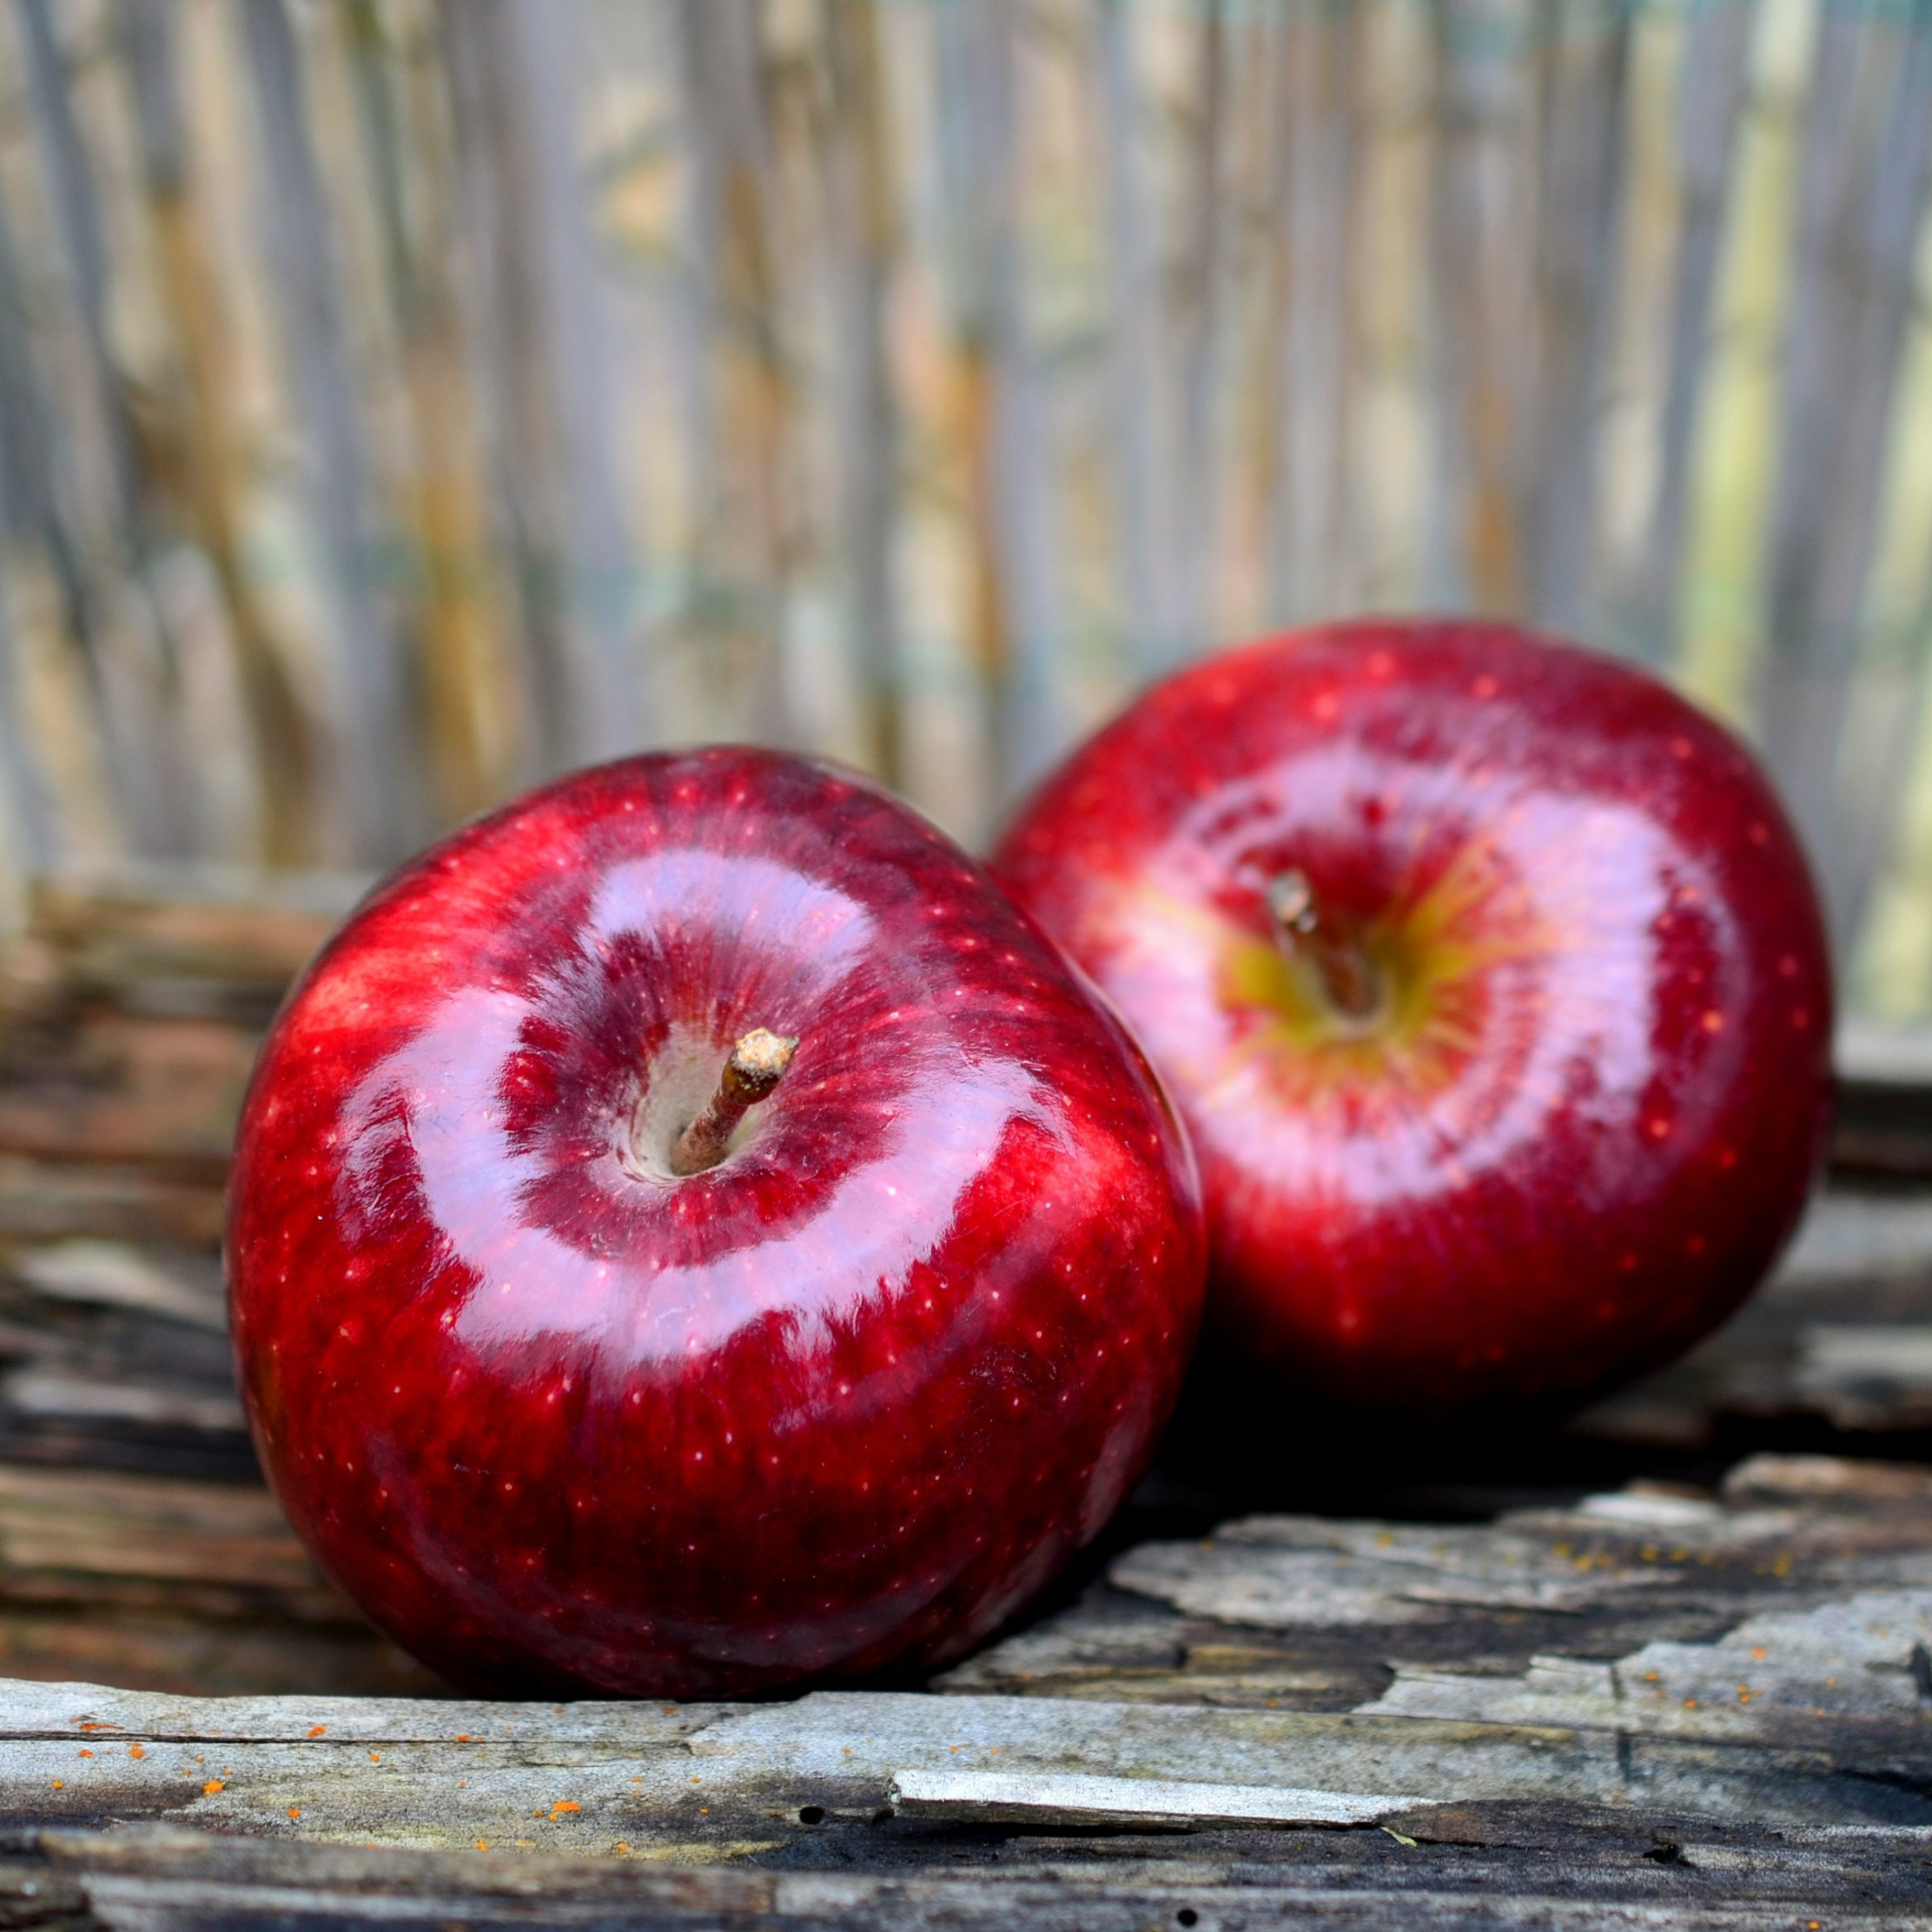 Delicious red apples wallpaper 2224x2224